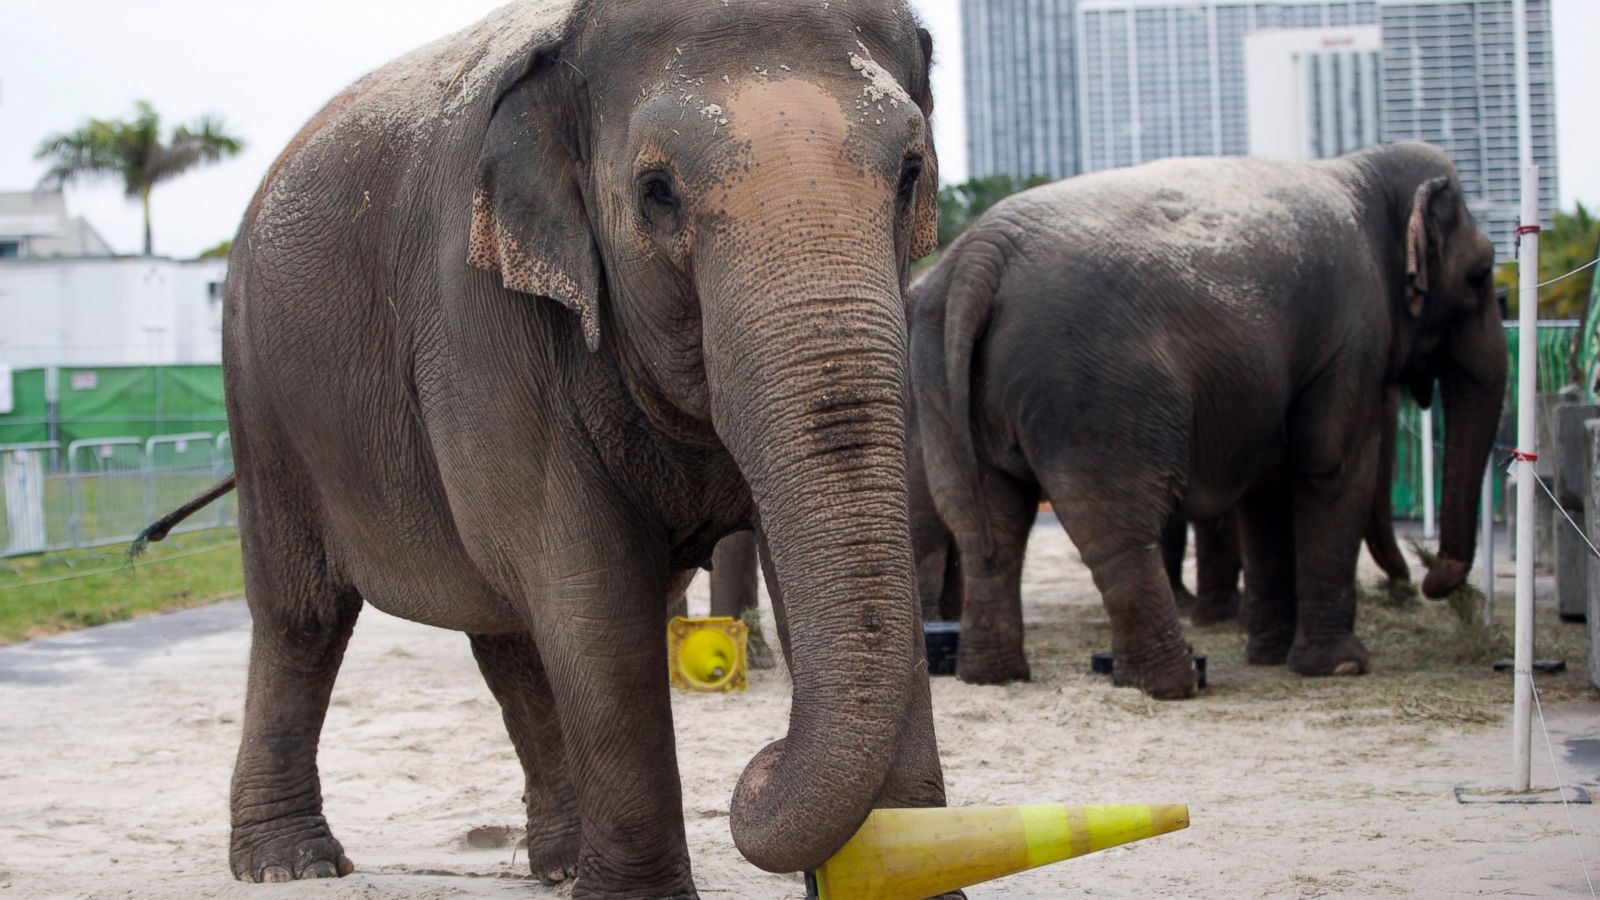 Ringling circus elephants to retire in May